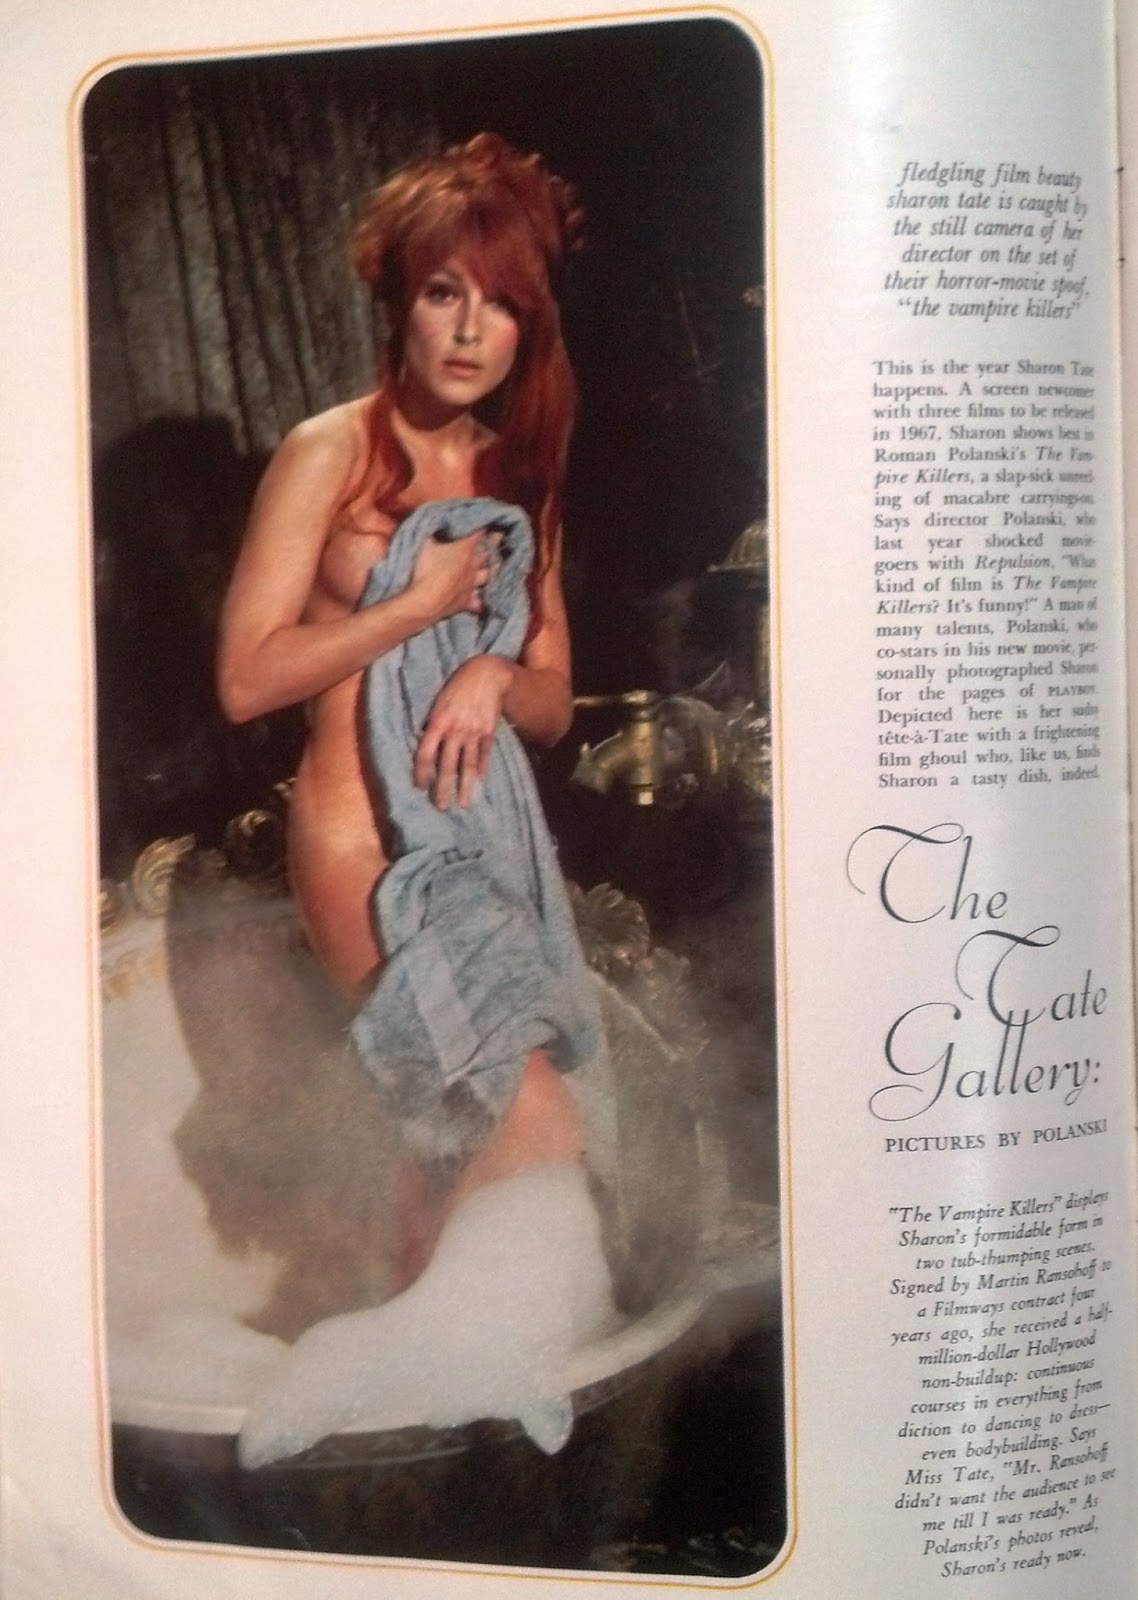 Sharon's March, 1967 Playboy Pictoral.